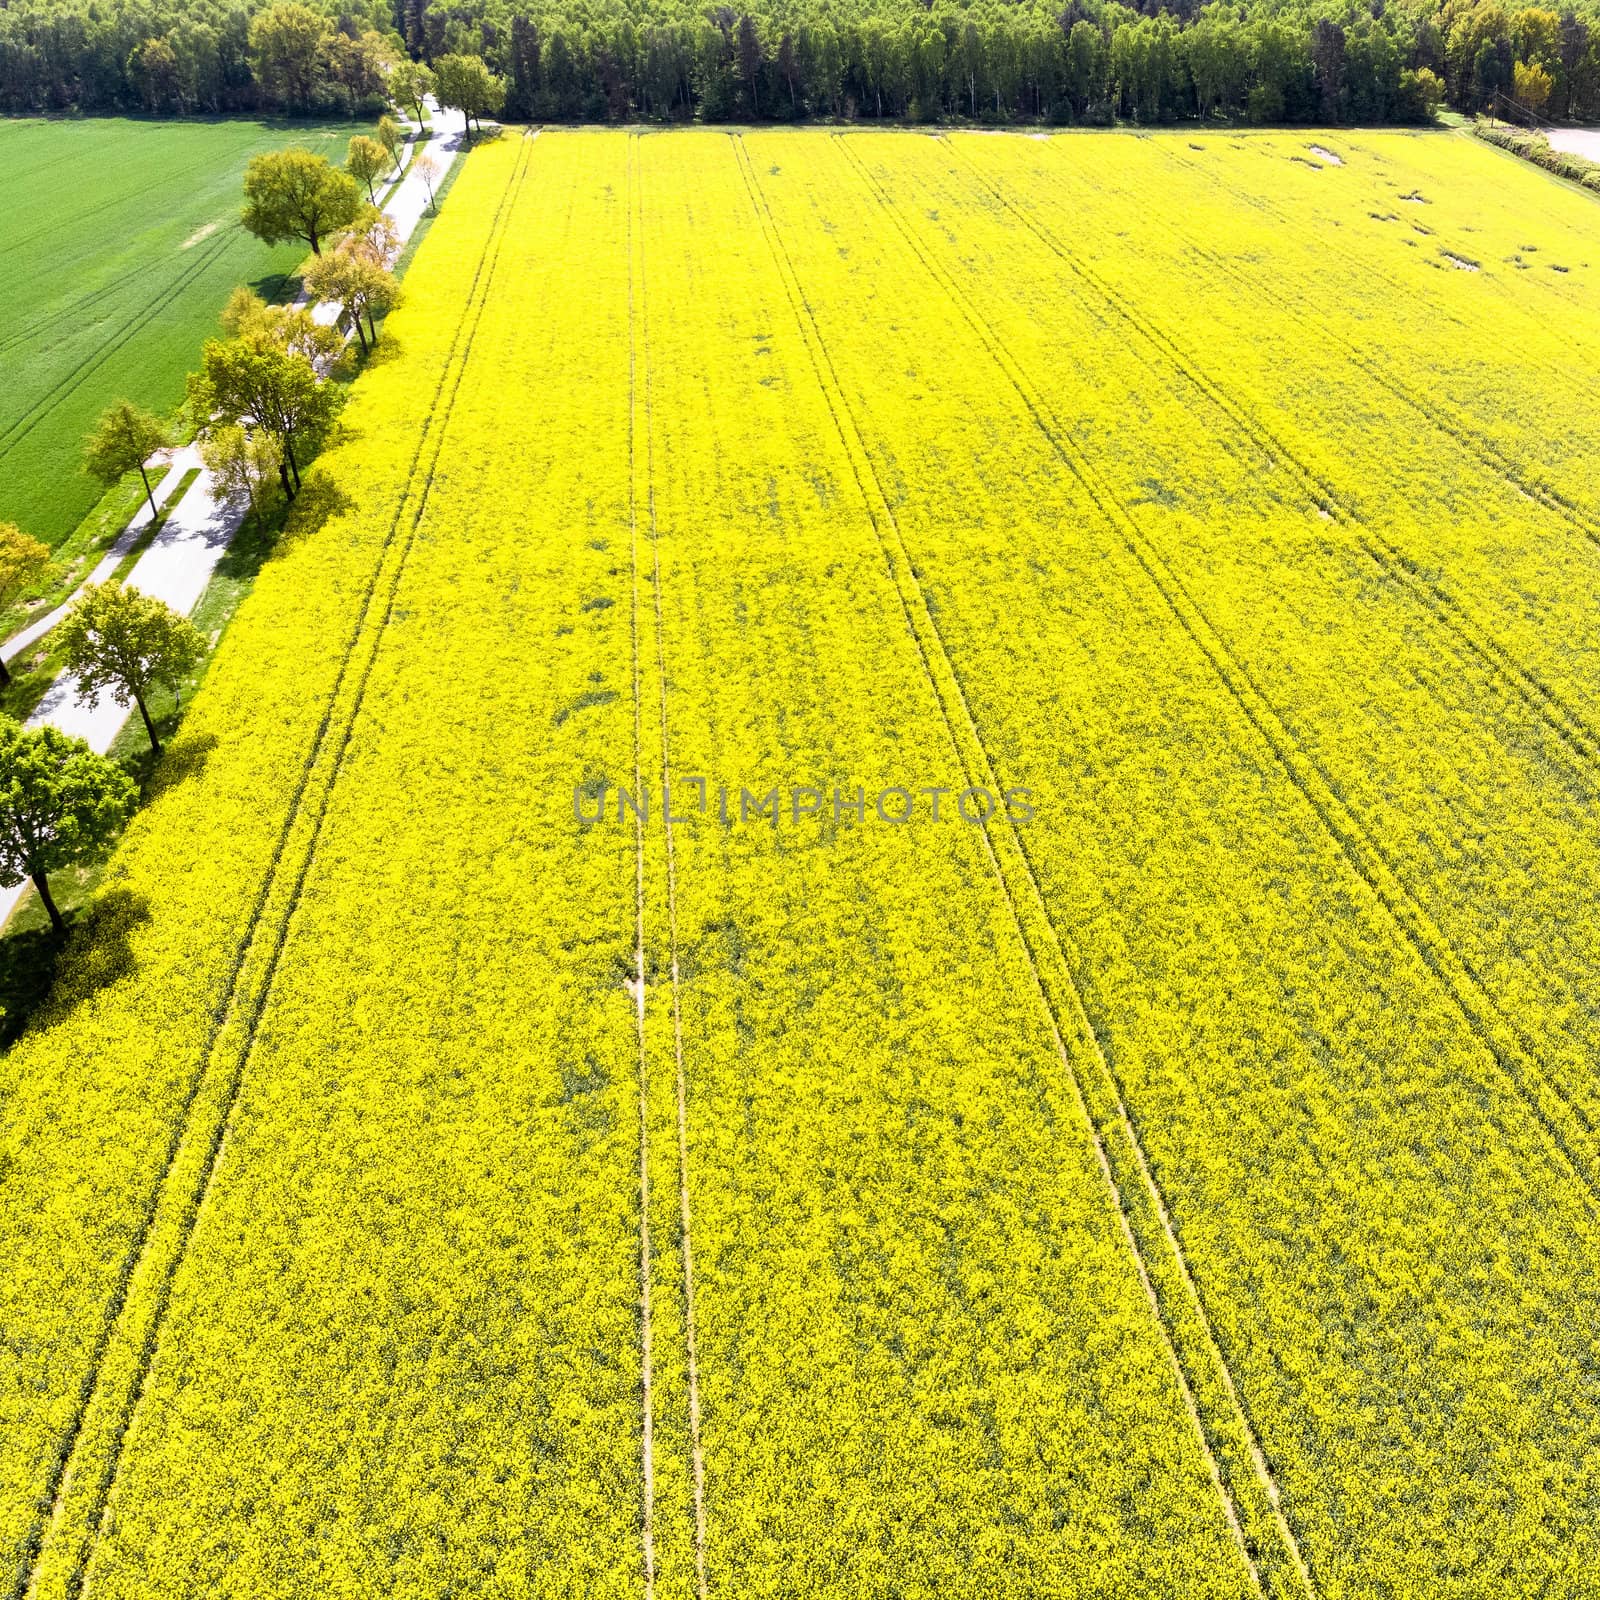 Aerial view of a yellow flowering field with rape next to a street with an avenue with trees, made with drone